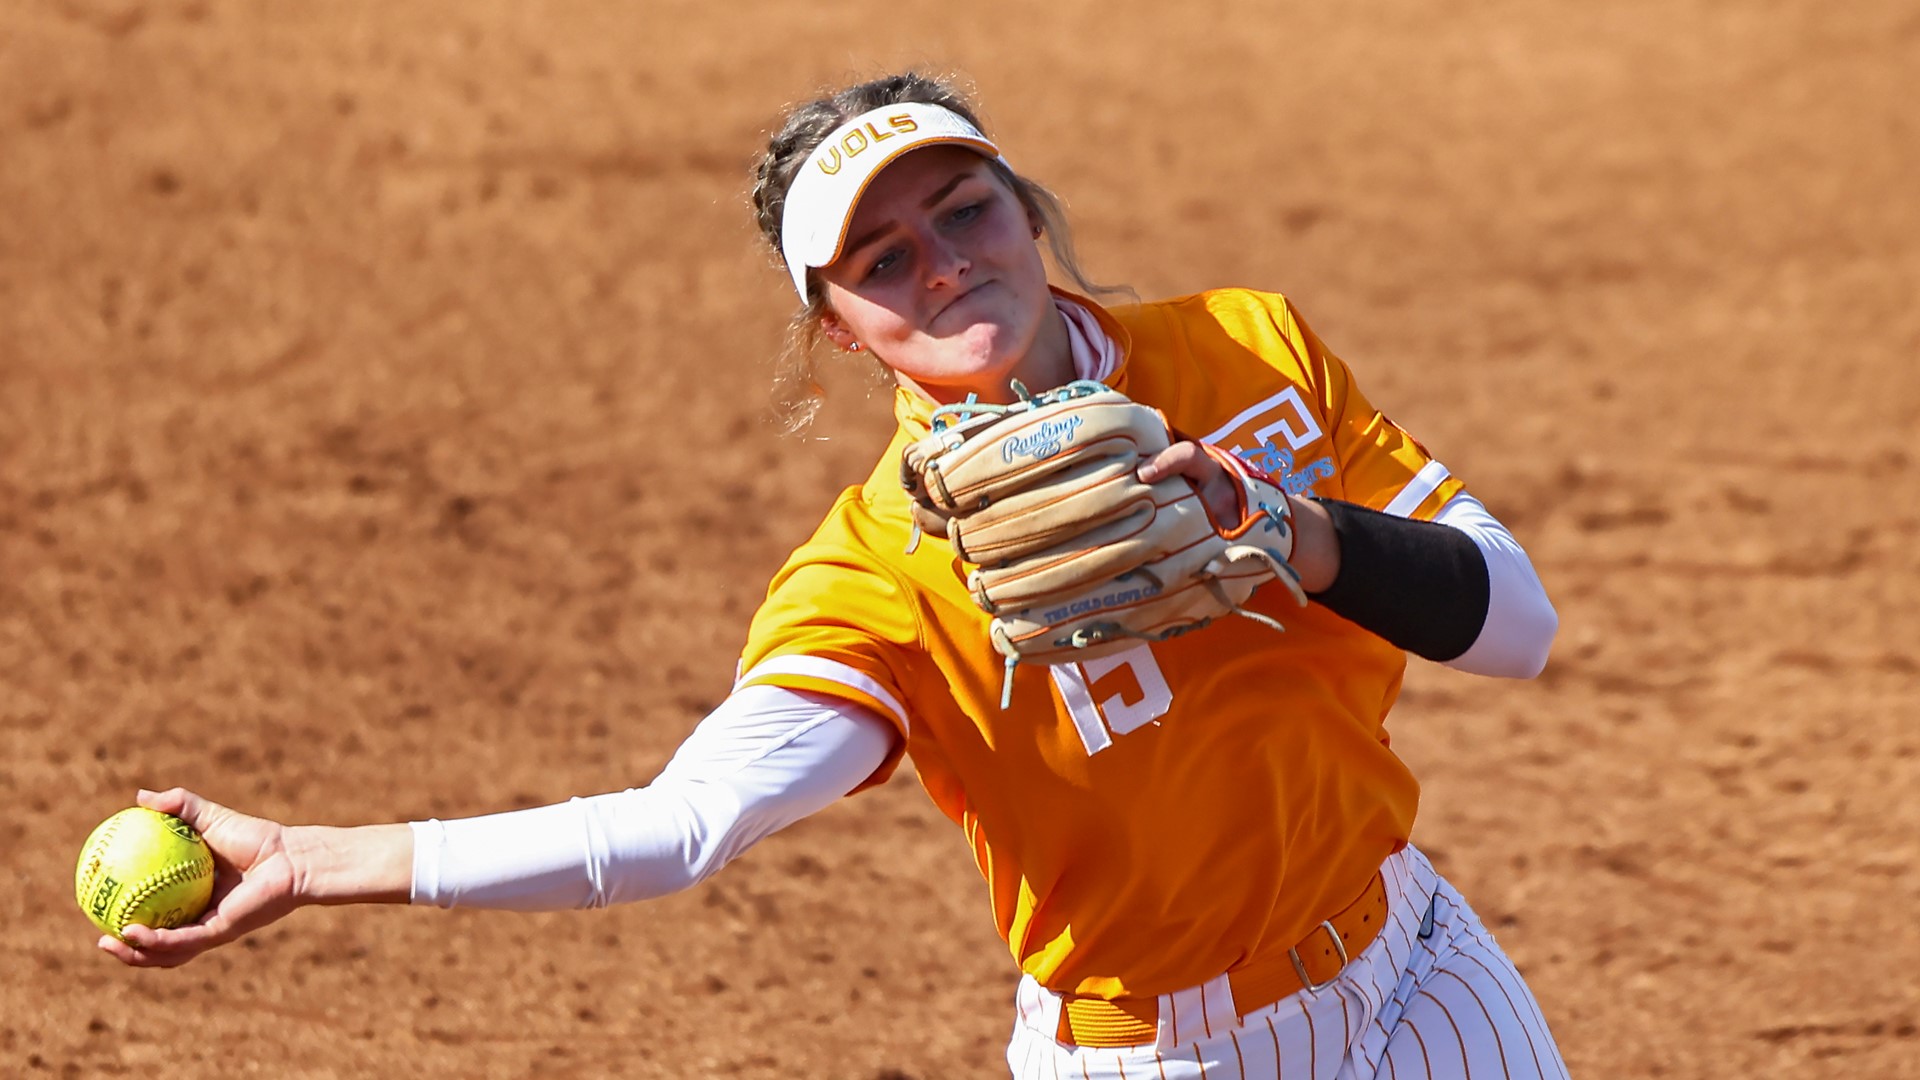 Tennessee begins their season on Friday and the team is motivated to do better this season after getting ousted in the NAA Regionals last season.